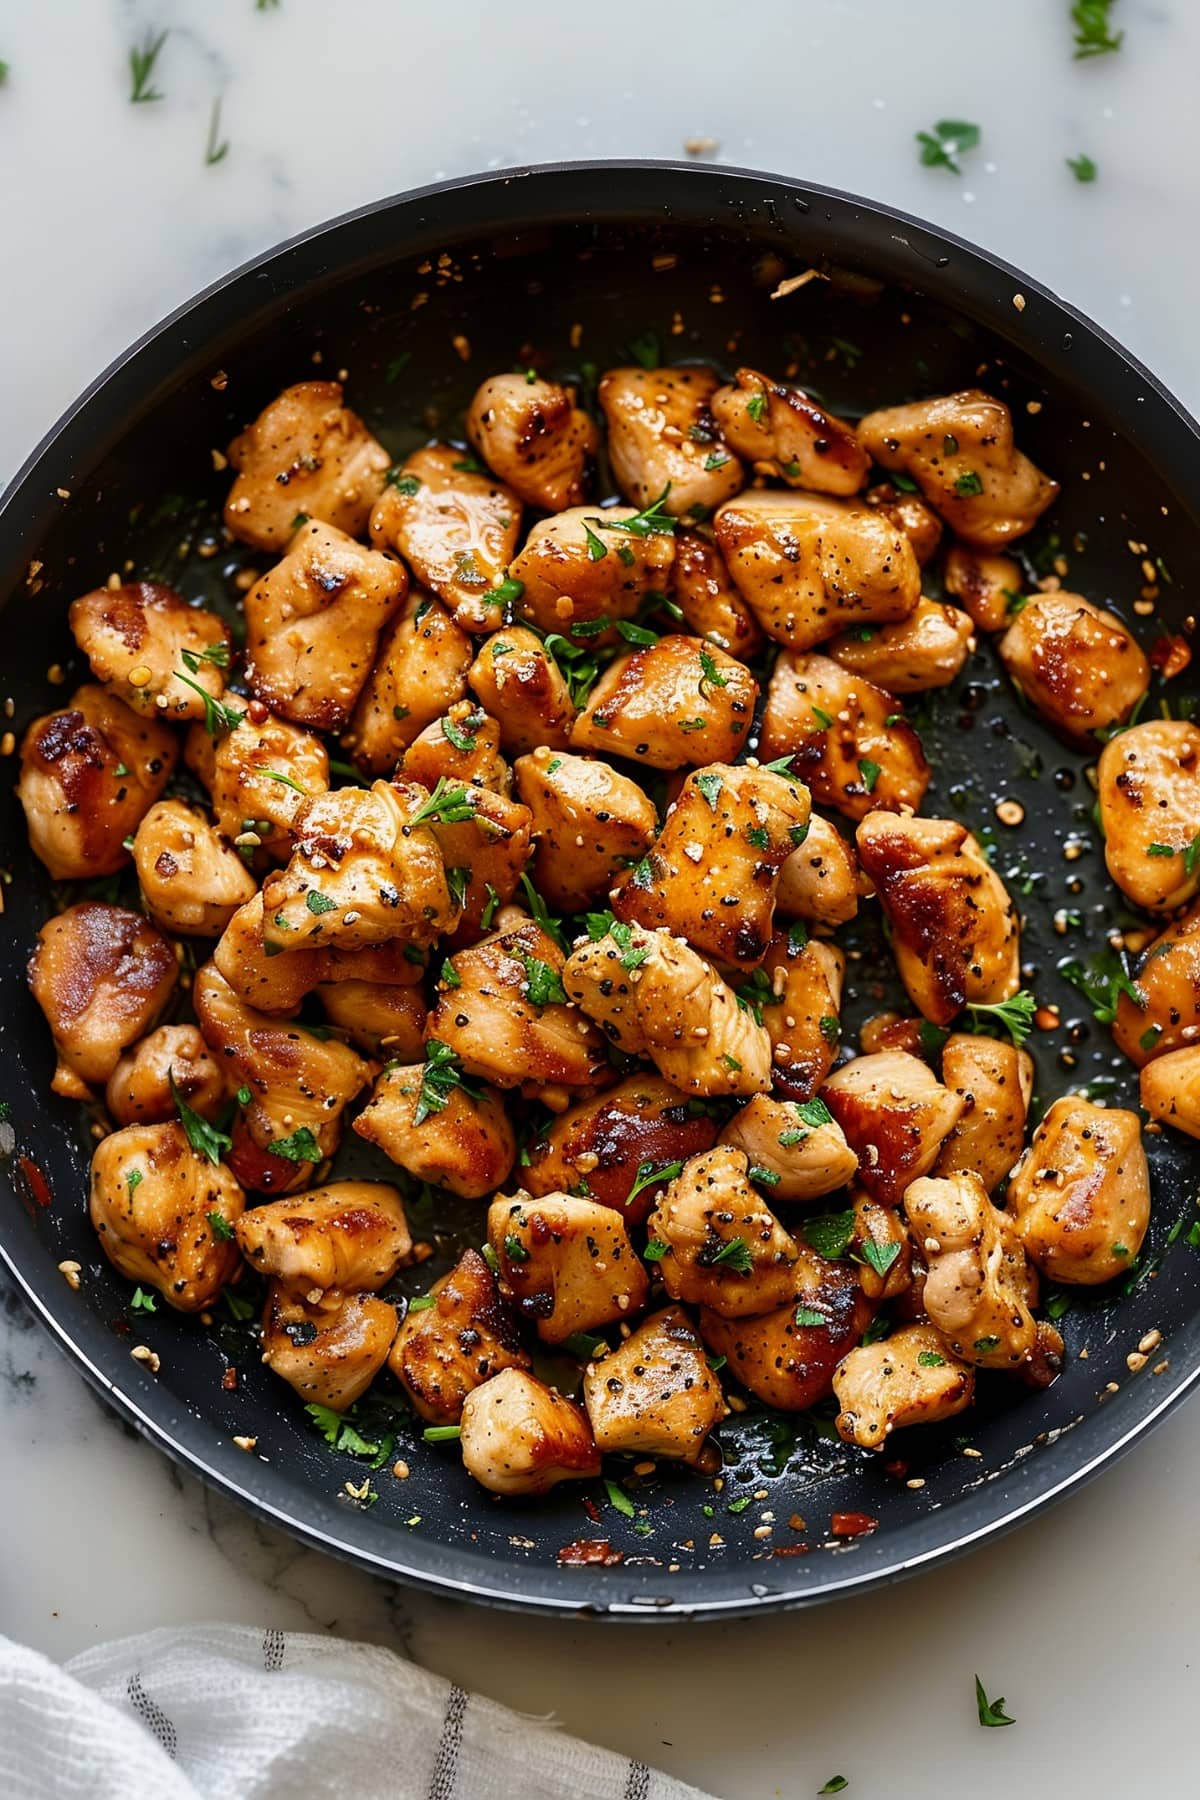 Savory garlic butter chicken bites with Italian seasoning and parsley in a black skillet, overhead view